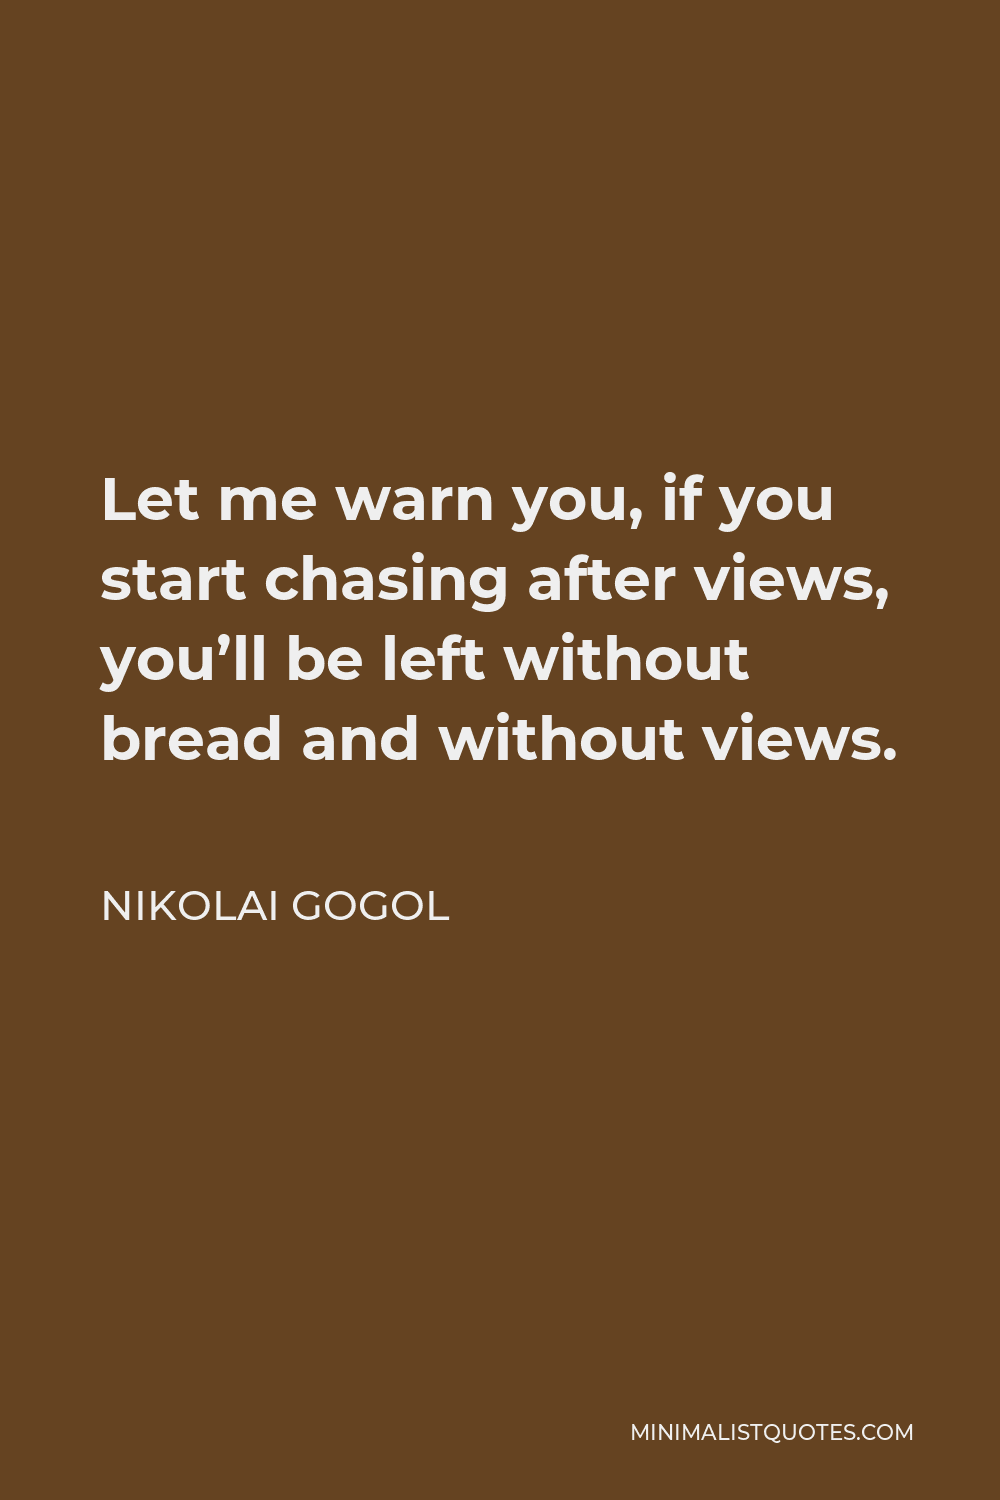 Nikolai Gogol Quote - Let me warn you, if you start chasing after views, you’ll be left without bread and without views.